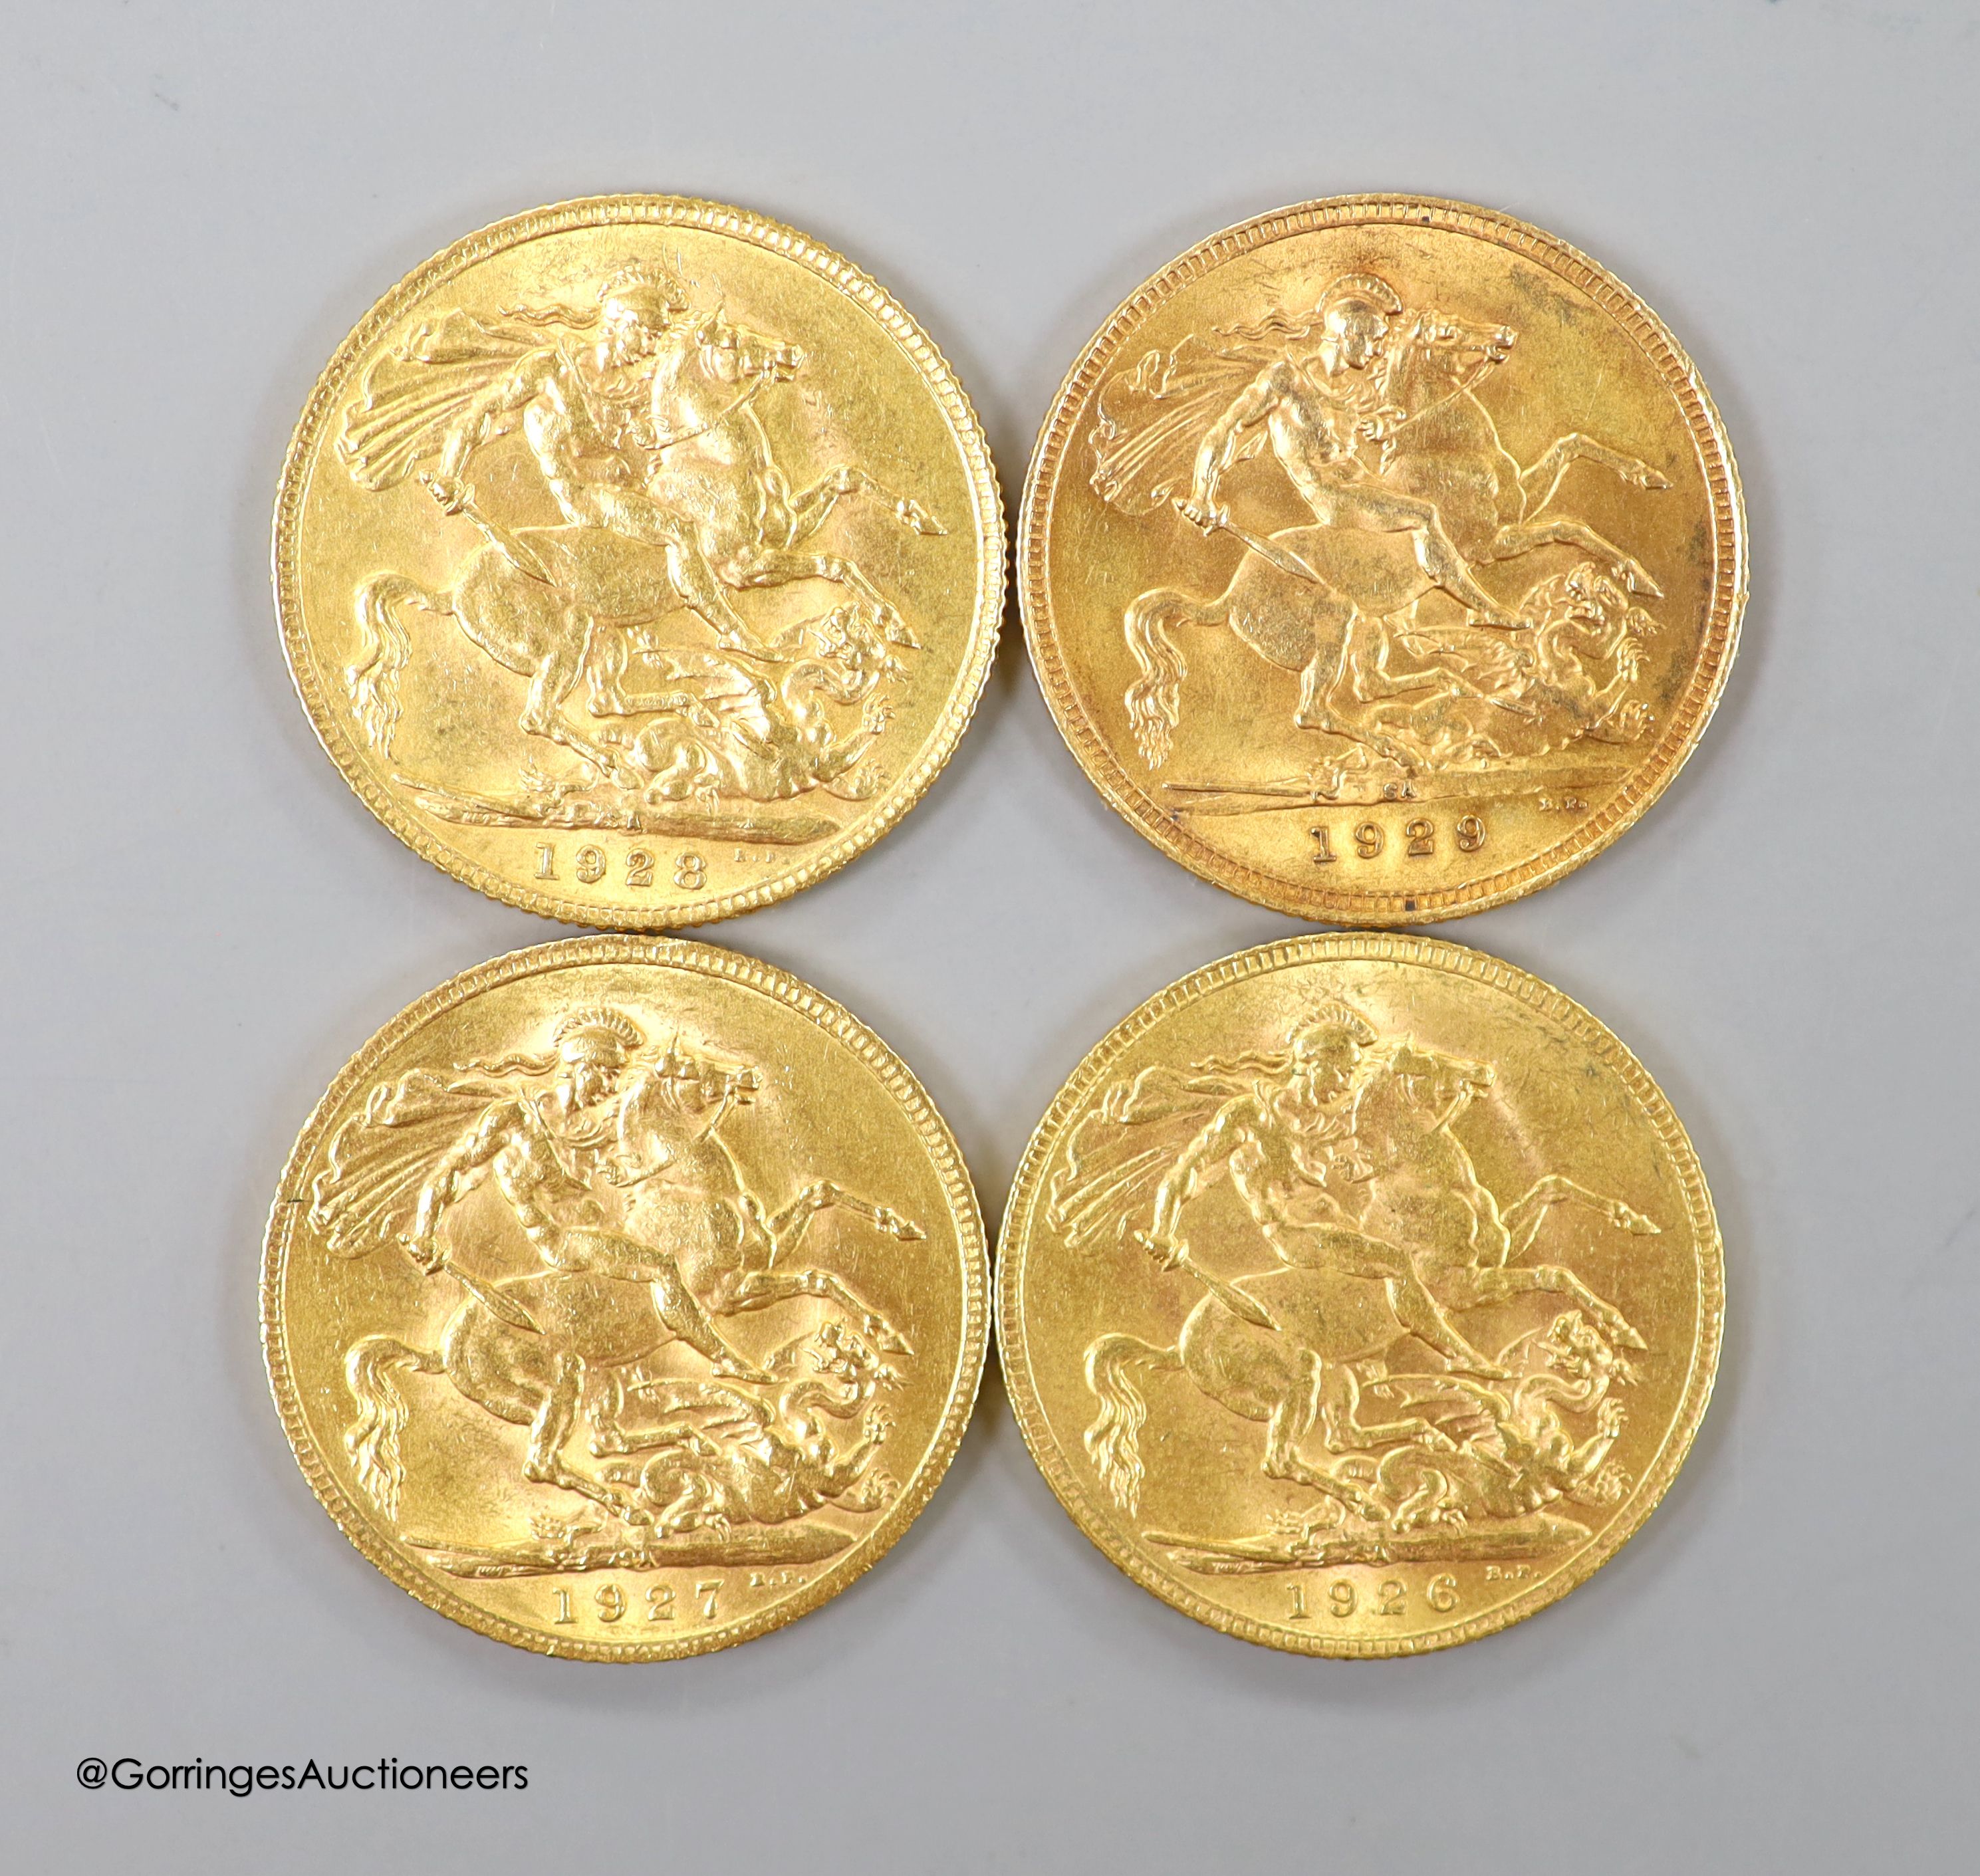 Four George V gold sovereigns, 1926, 1927, 1928 and 1929, all South Africa mint